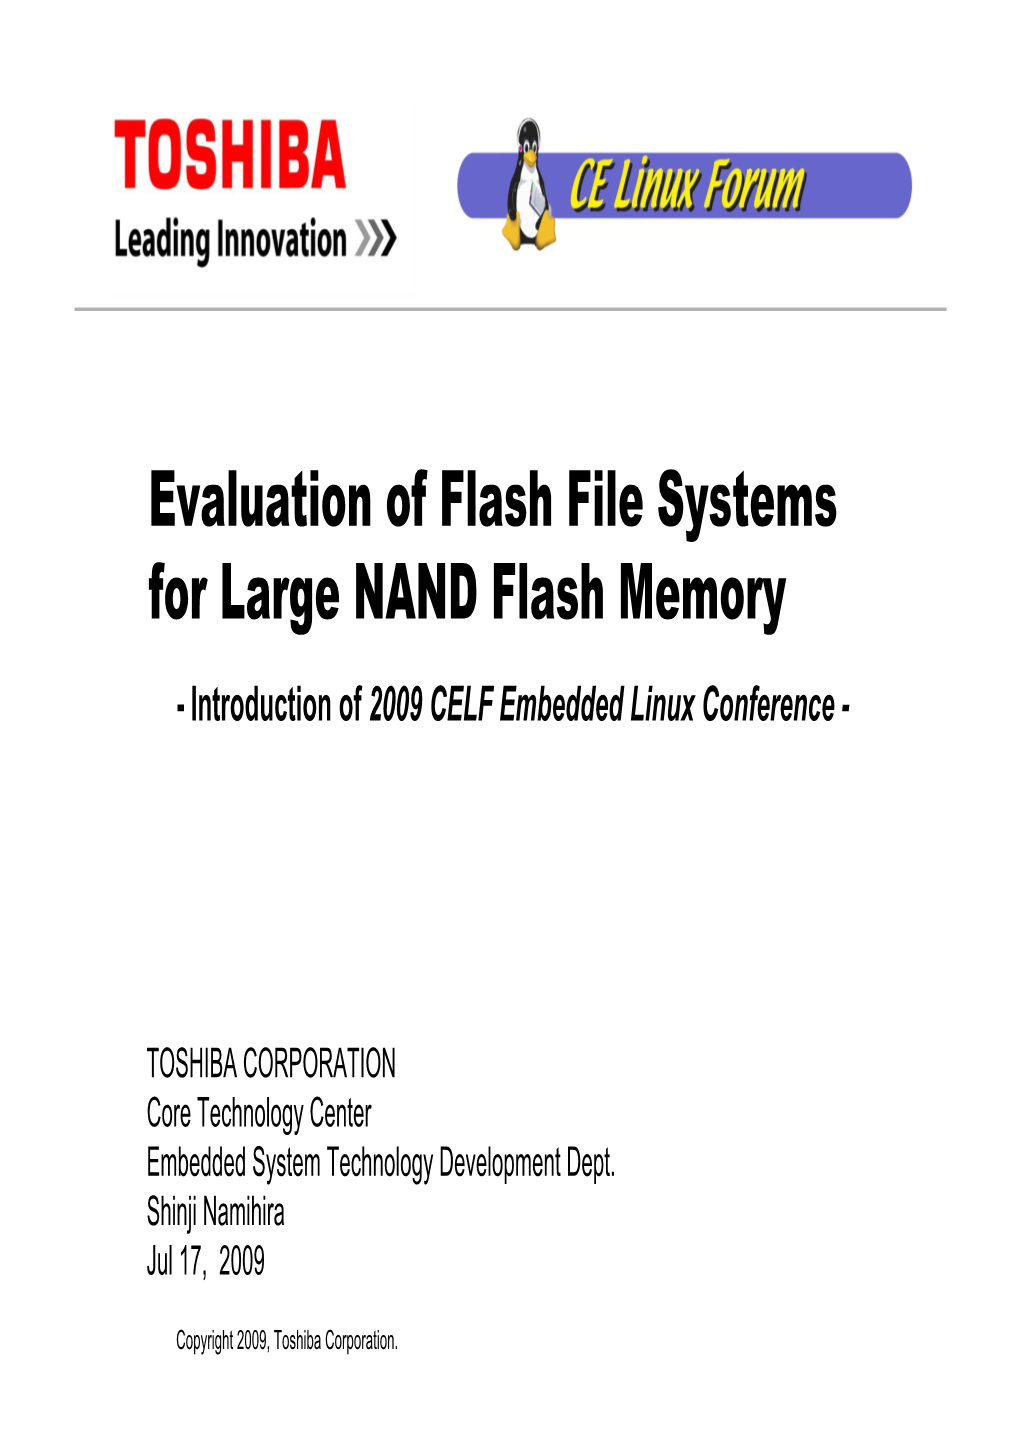 Evaluation of Flash File Systems for Large NAND Flash Memory - Introduction of 2009 CELF Embedded Linux Conference